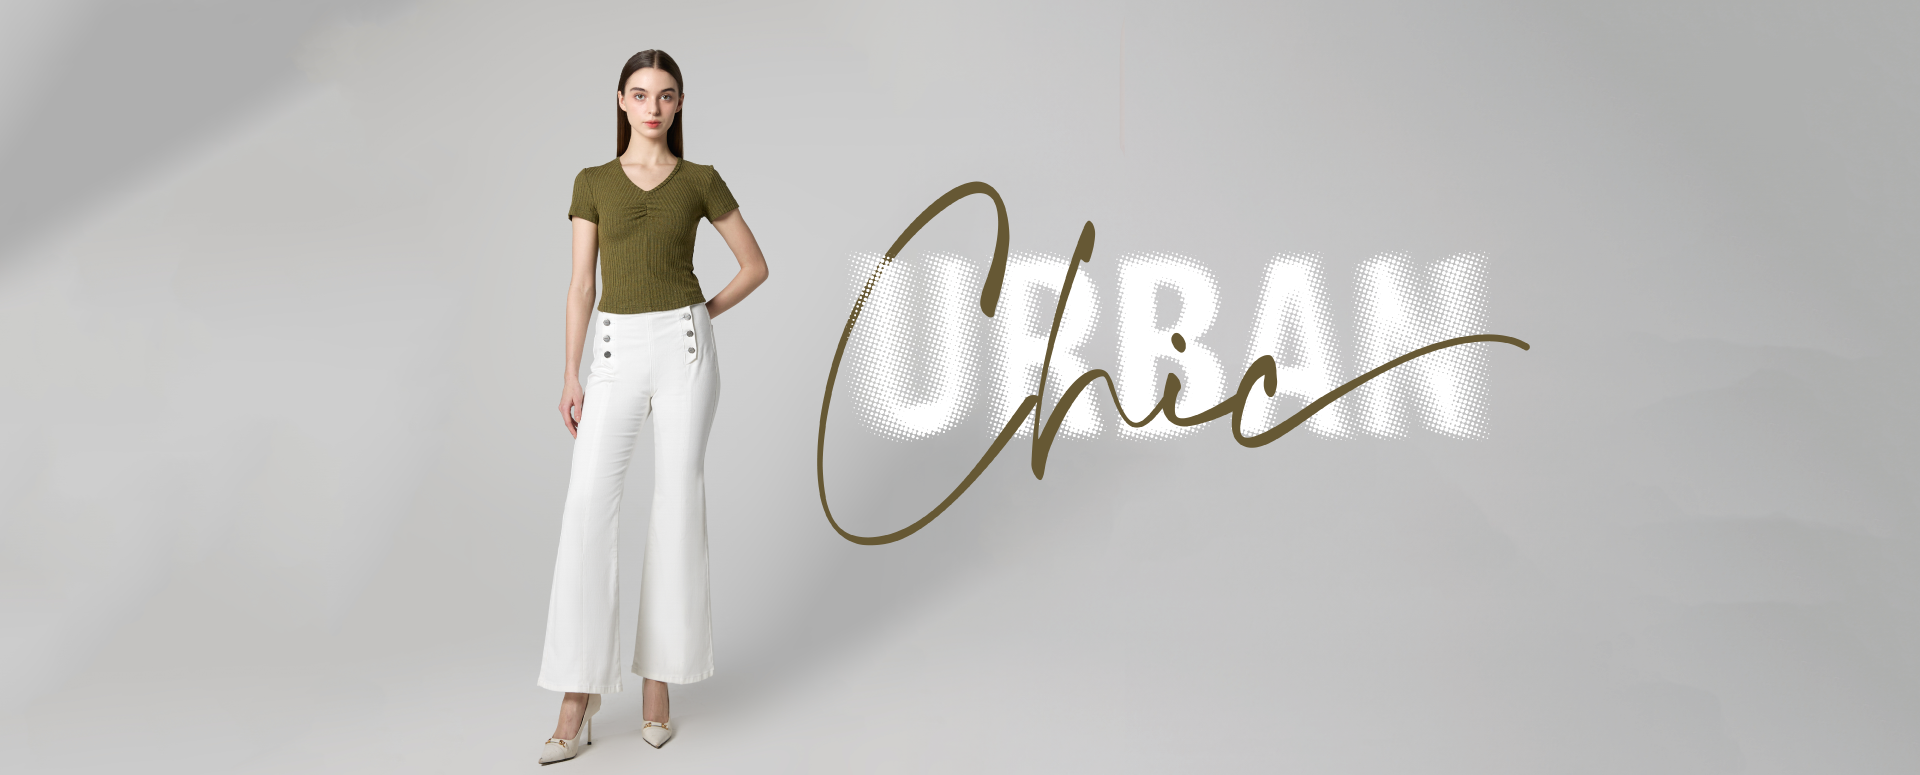 Urban Chic Collection